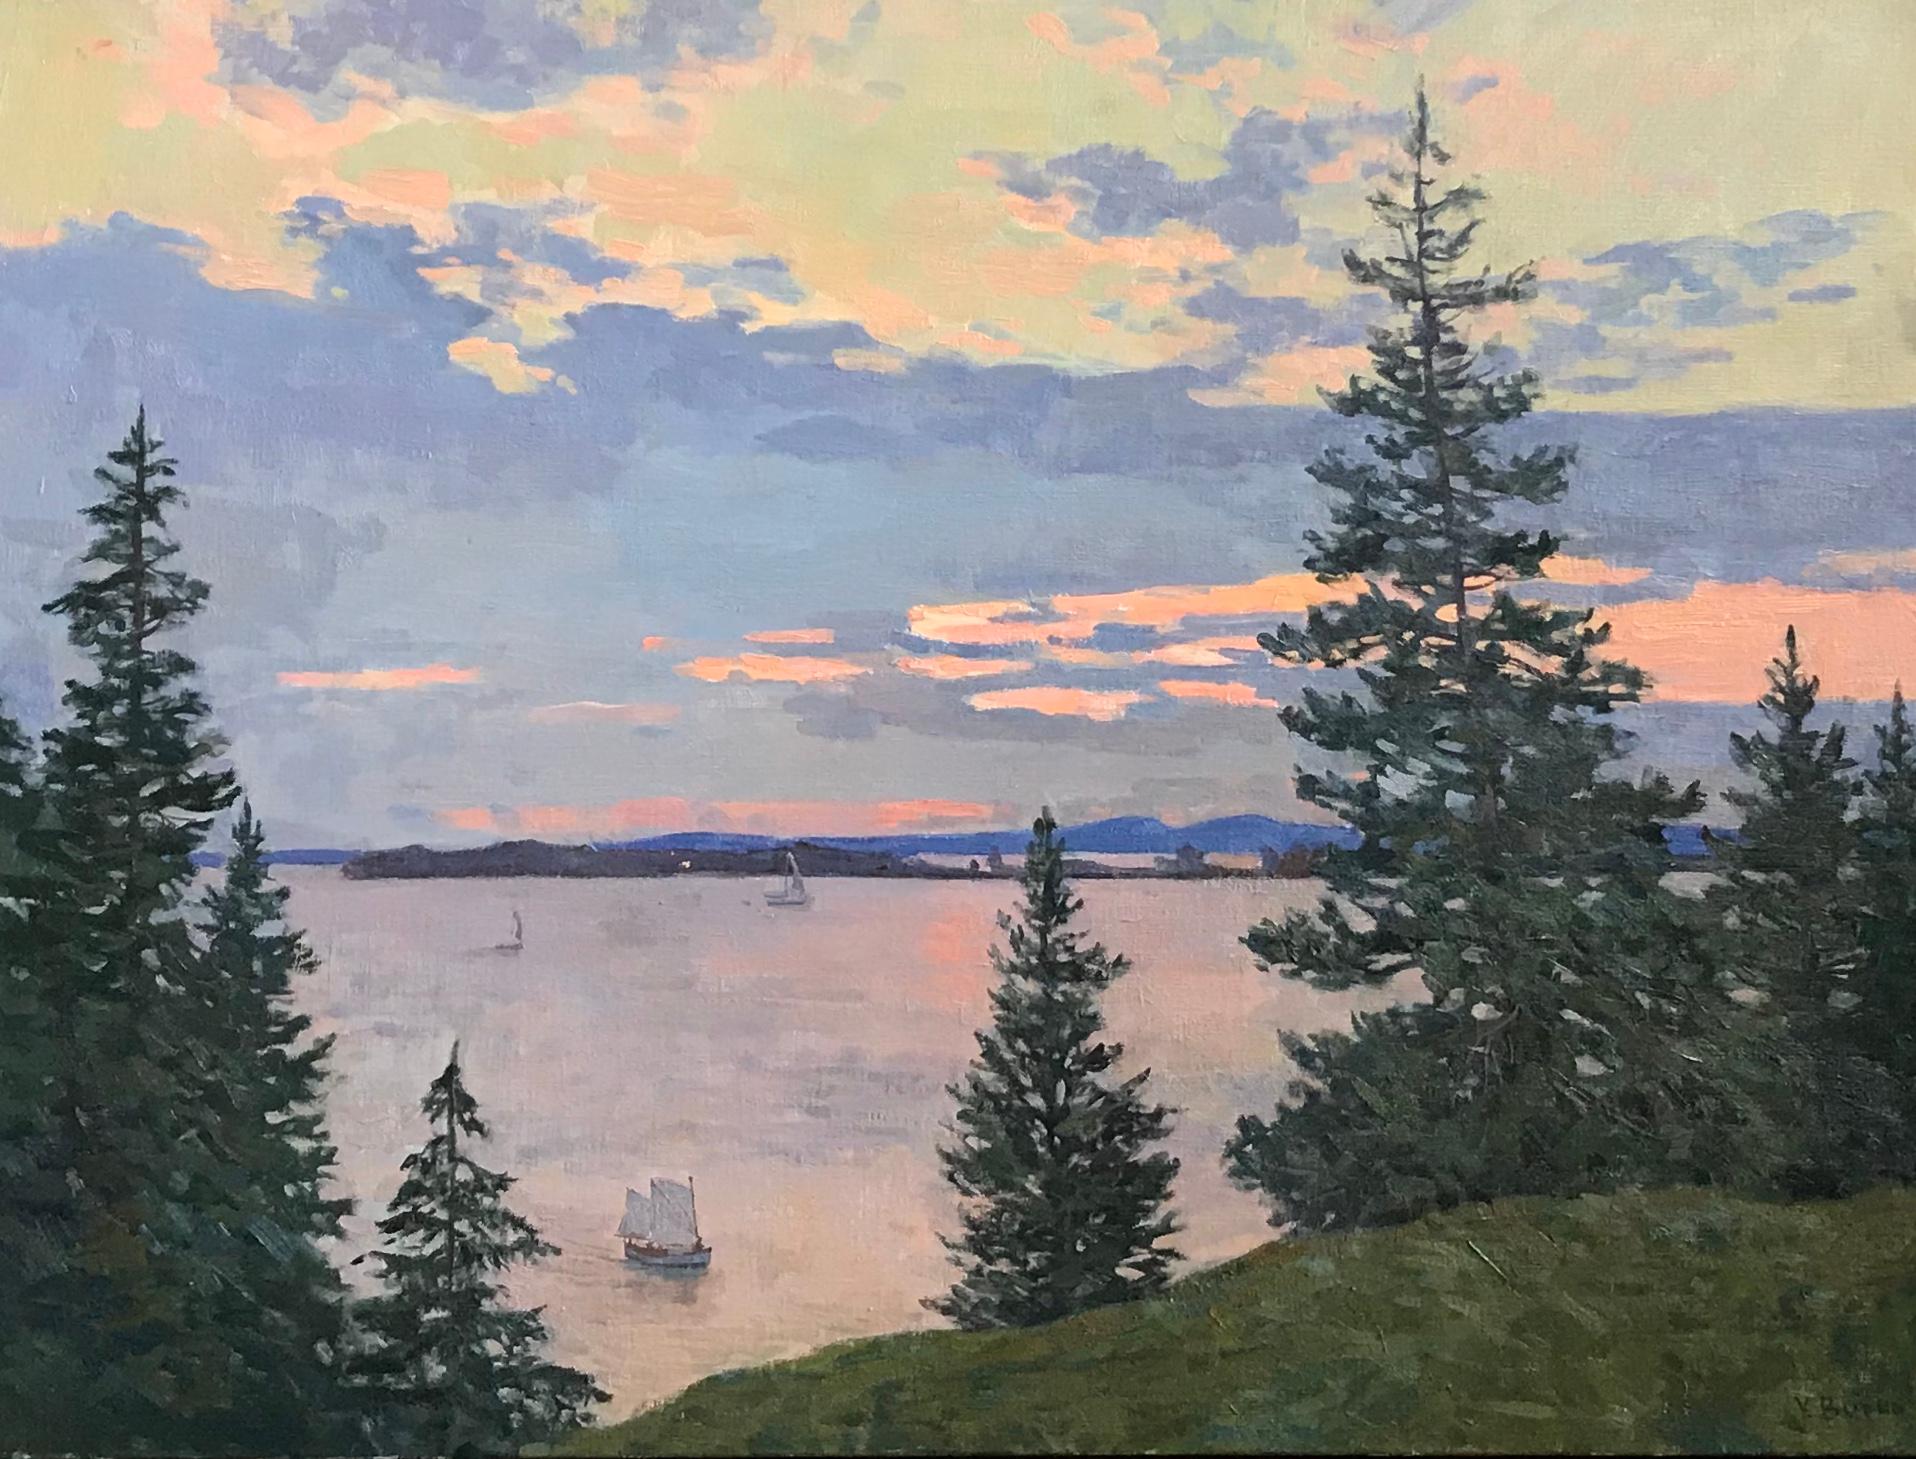 Sunset Over the Islands - 2023 Impressionistic Harbor - plein air painting